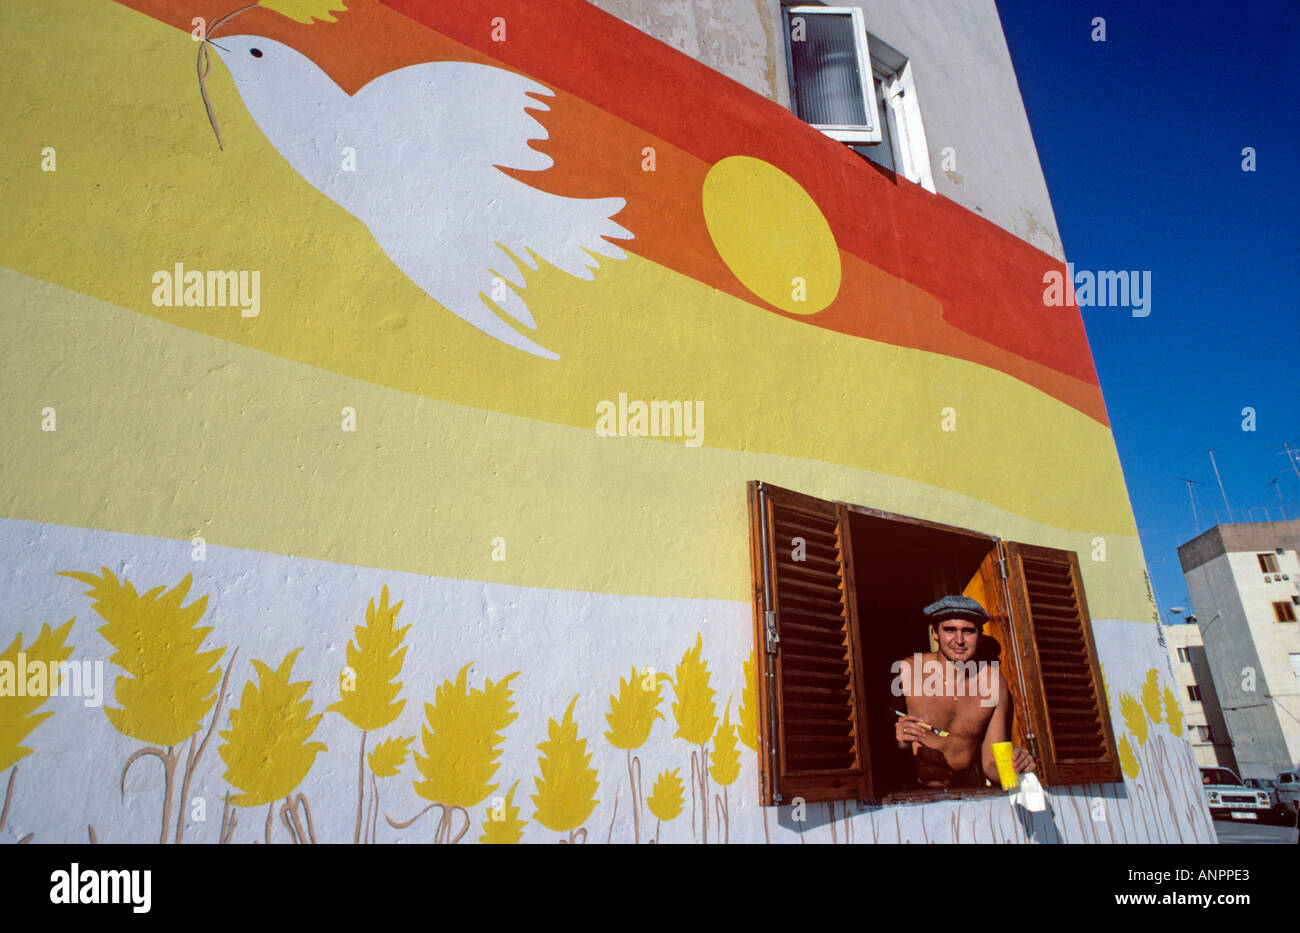 Bird of peace mural and resident artist with his artwork at his open window Las Palmas town Vegueta Gran Canaria Canary Islands Spain Stock Photo